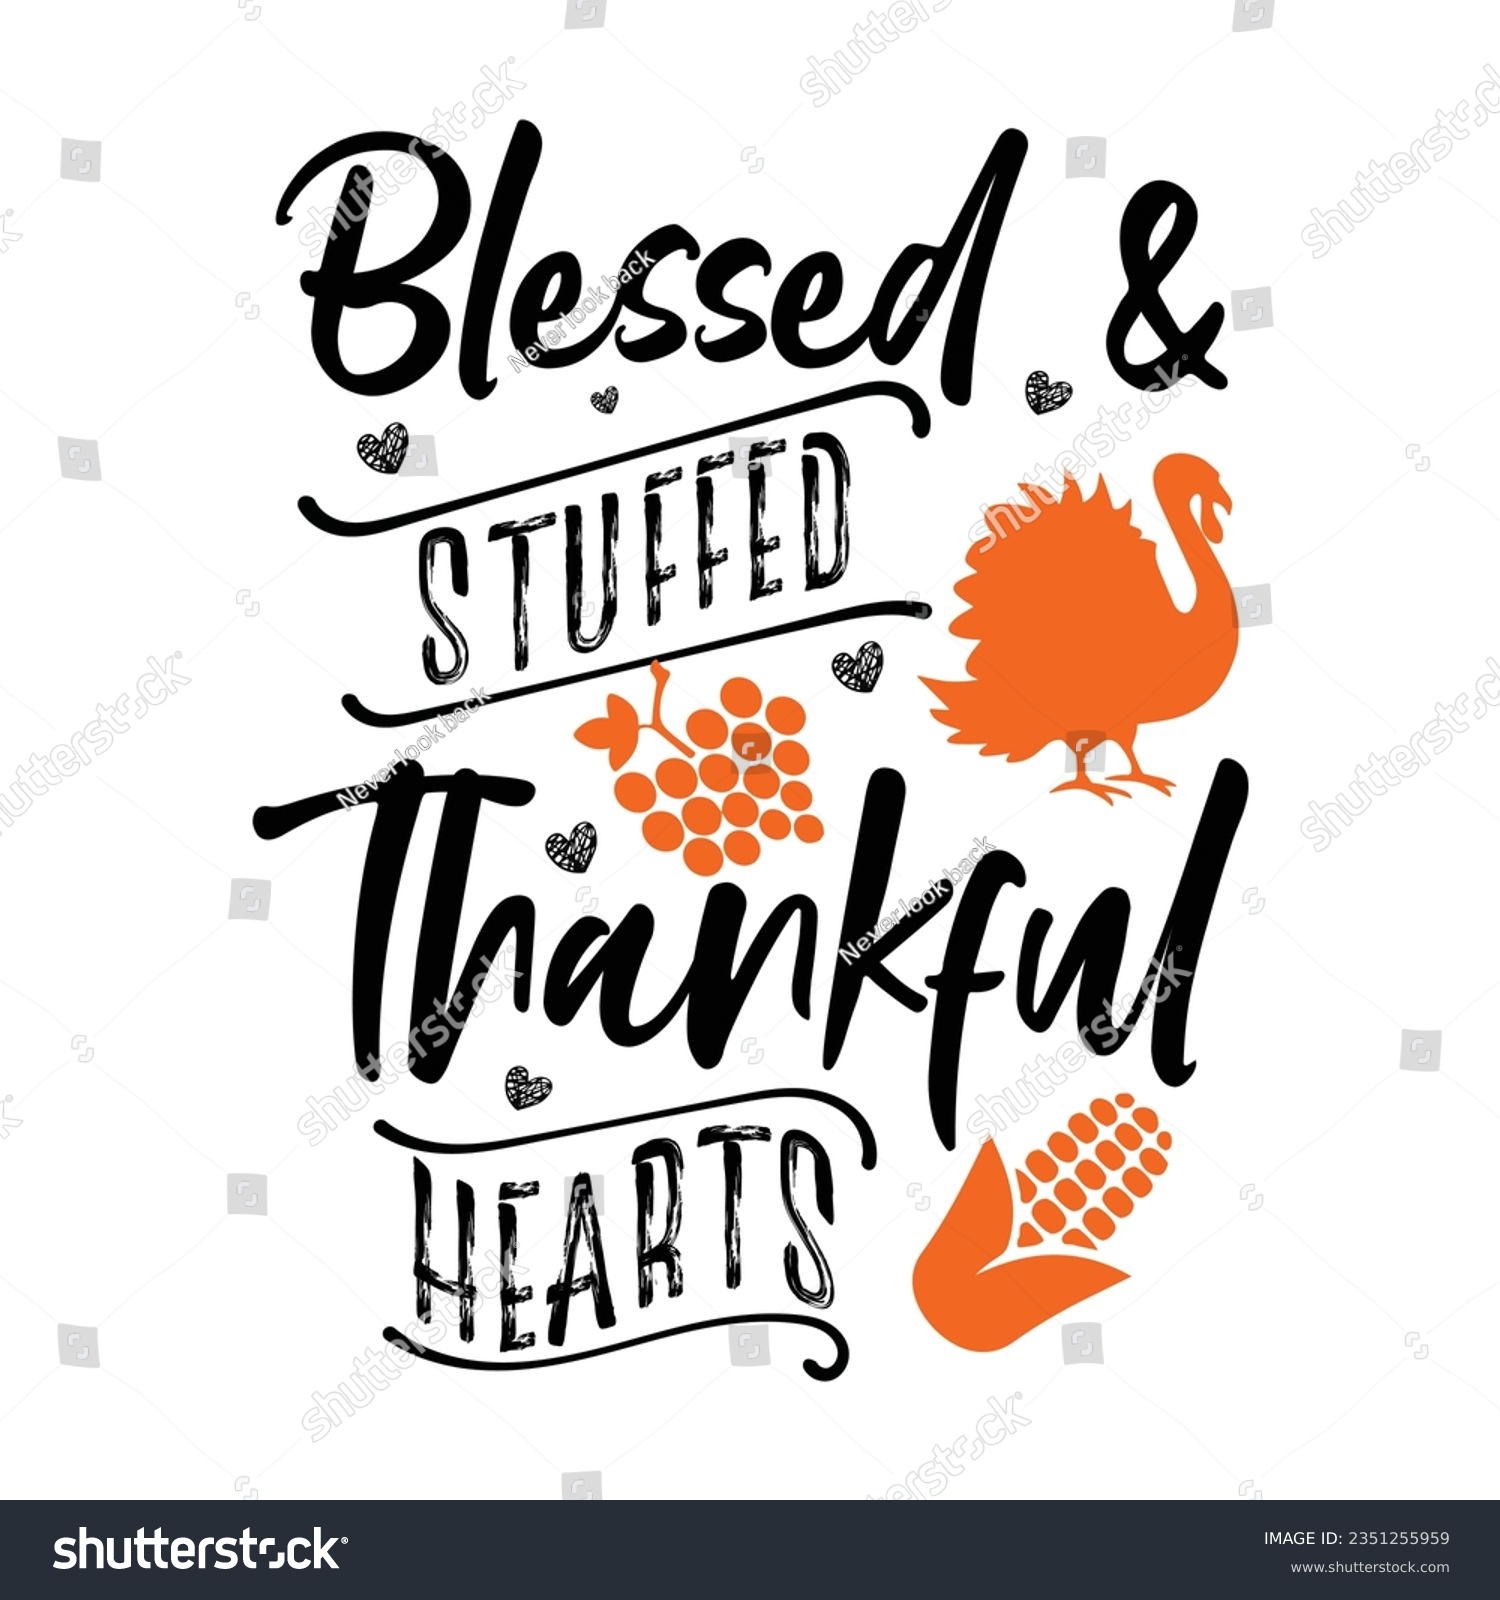 SVG of Blessed and Stuffed, Thankful Hearts ,SVG t-shirt design, black SVG cut files, typography custom t-shirt design
 svg